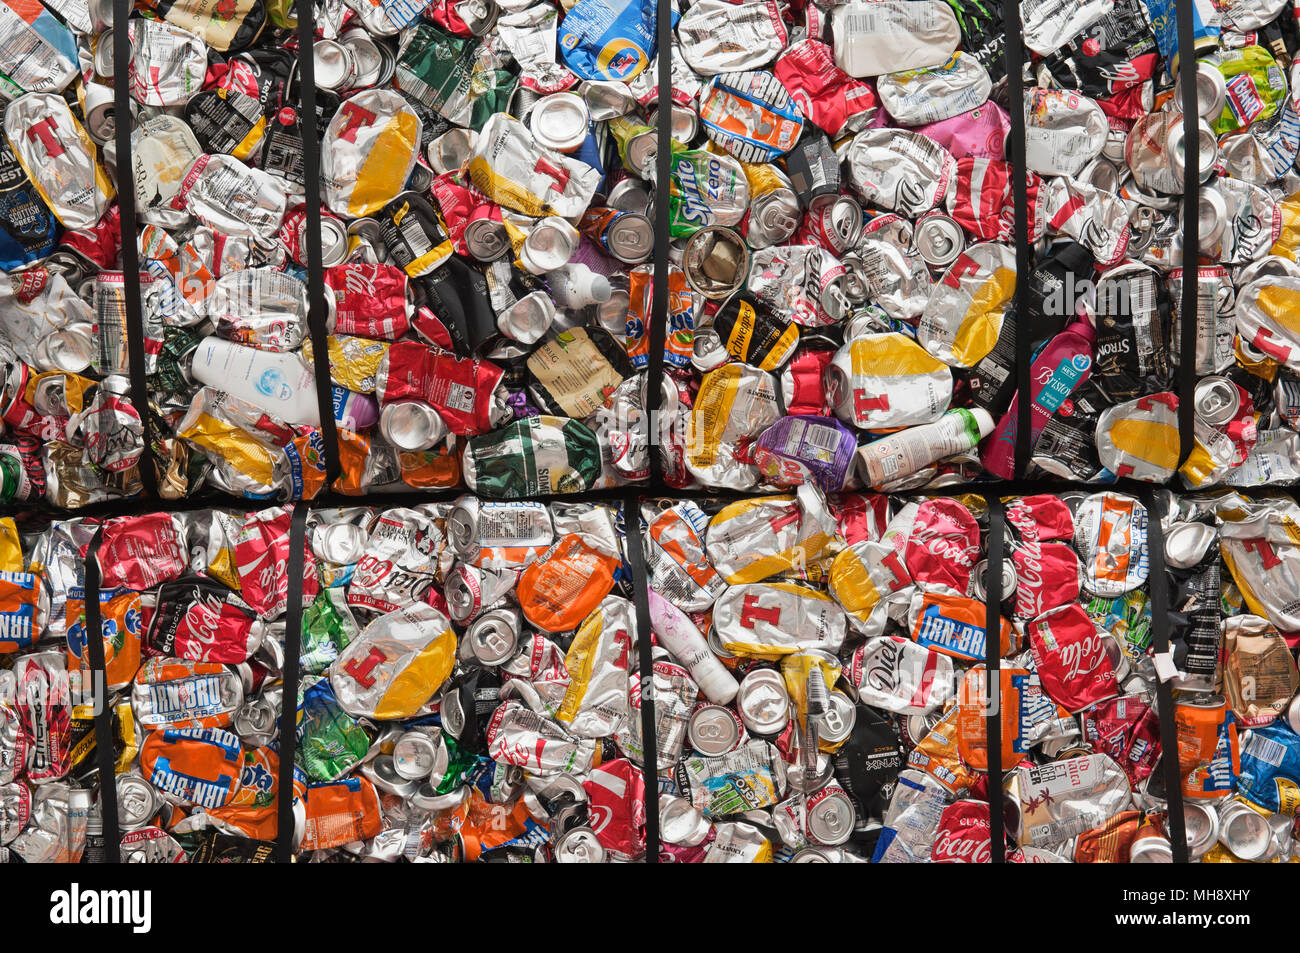 Aluminium cans being processed at a recycling plant. Stock Photo